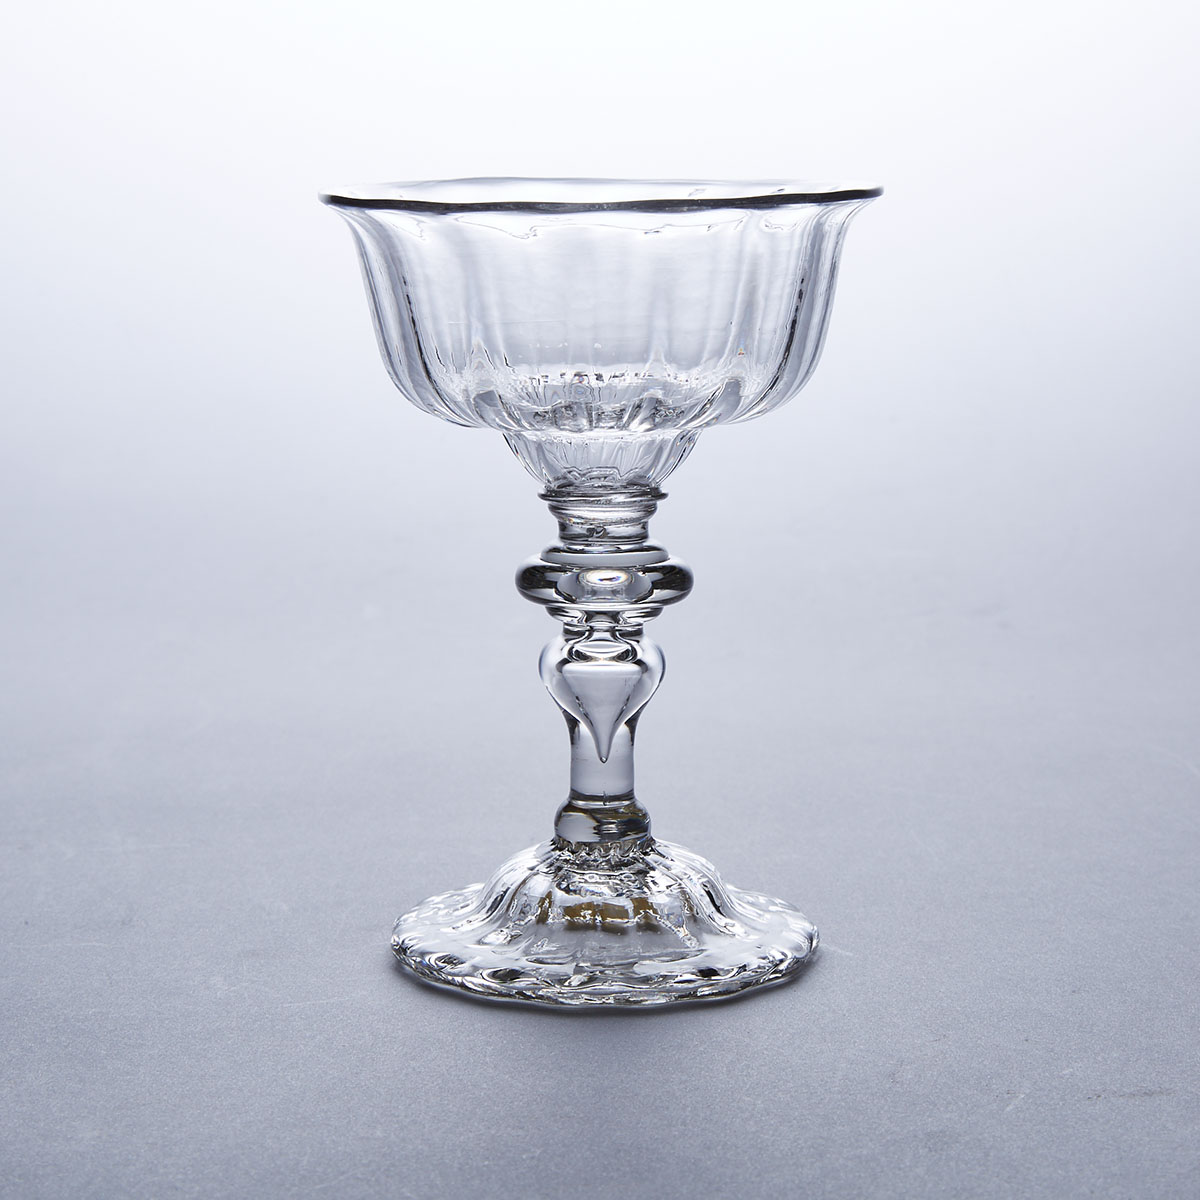 English Knopped Hollow Inverted Baluster Stemmed Sweetmeat or Champagne Glass, mid-18th century